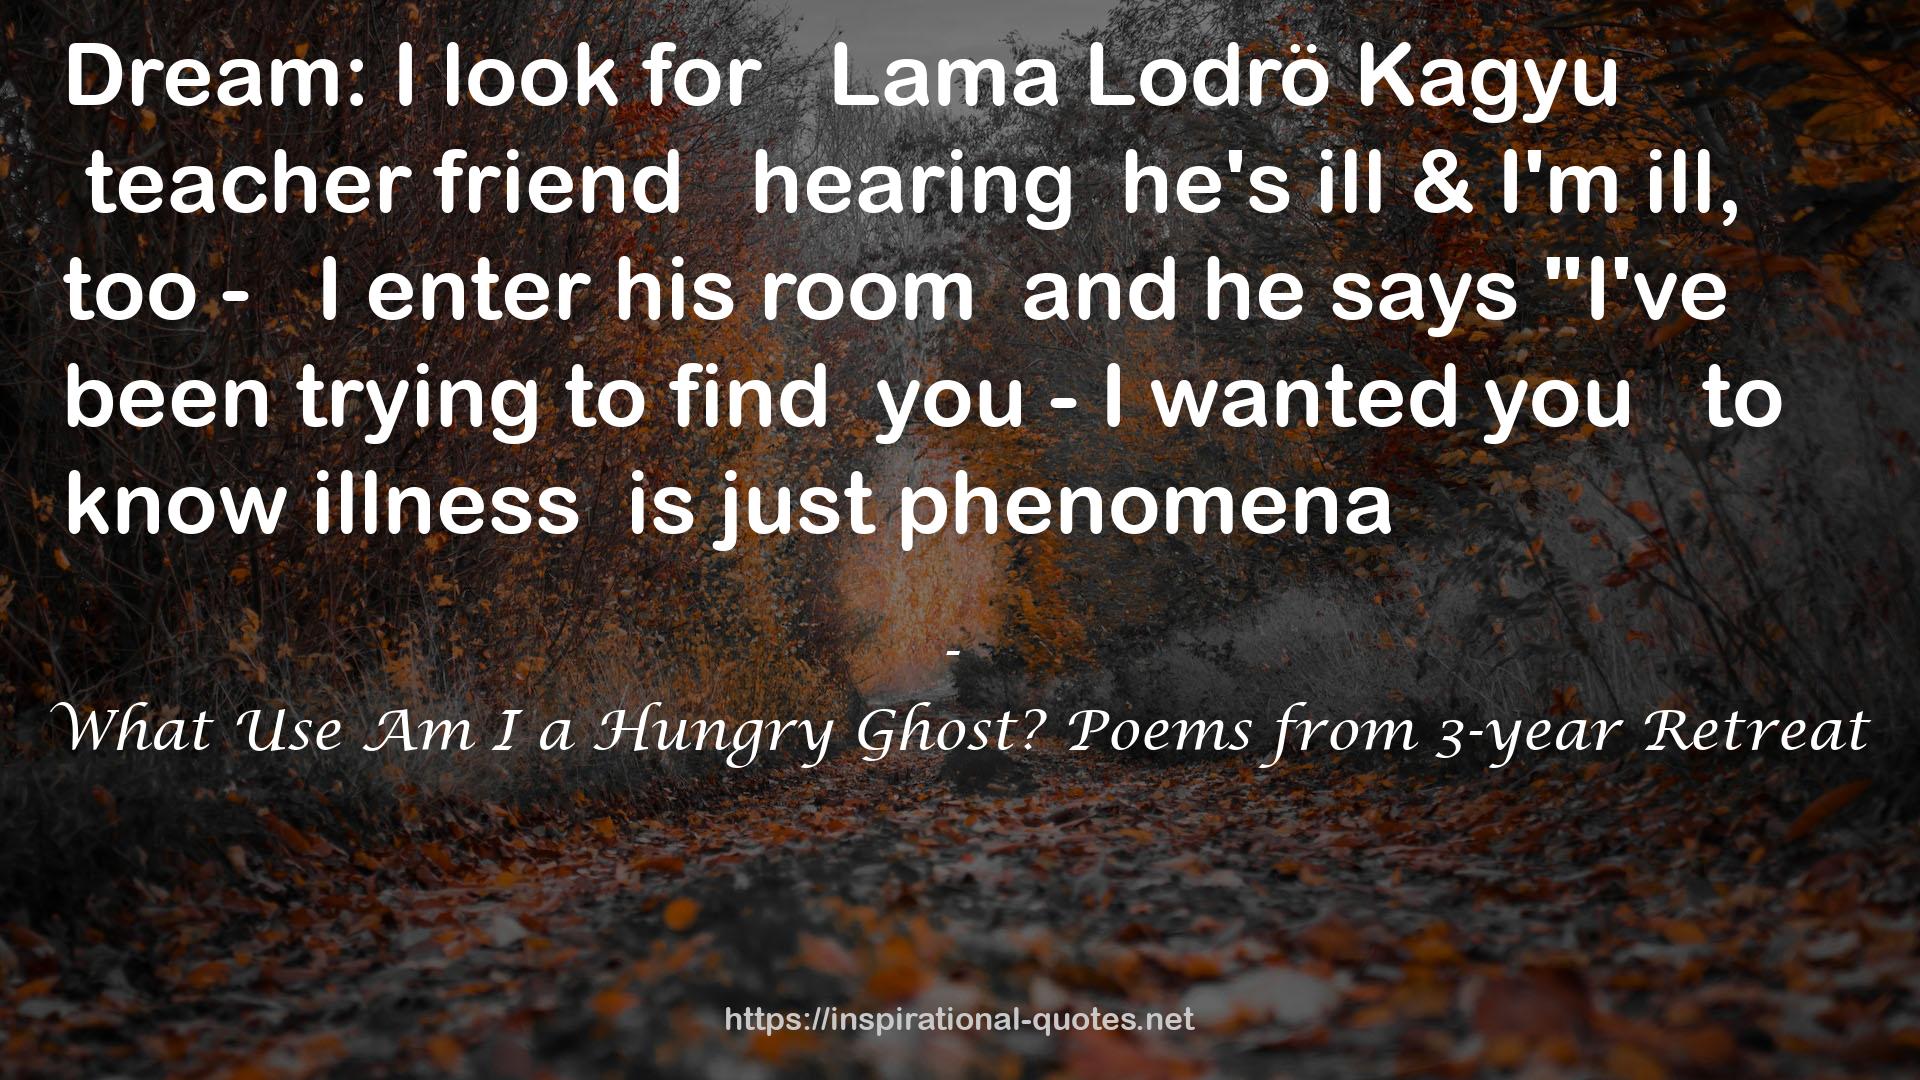 What Use Am I a Hungry Ghost? Poems from 3-year Retreat QUOTES